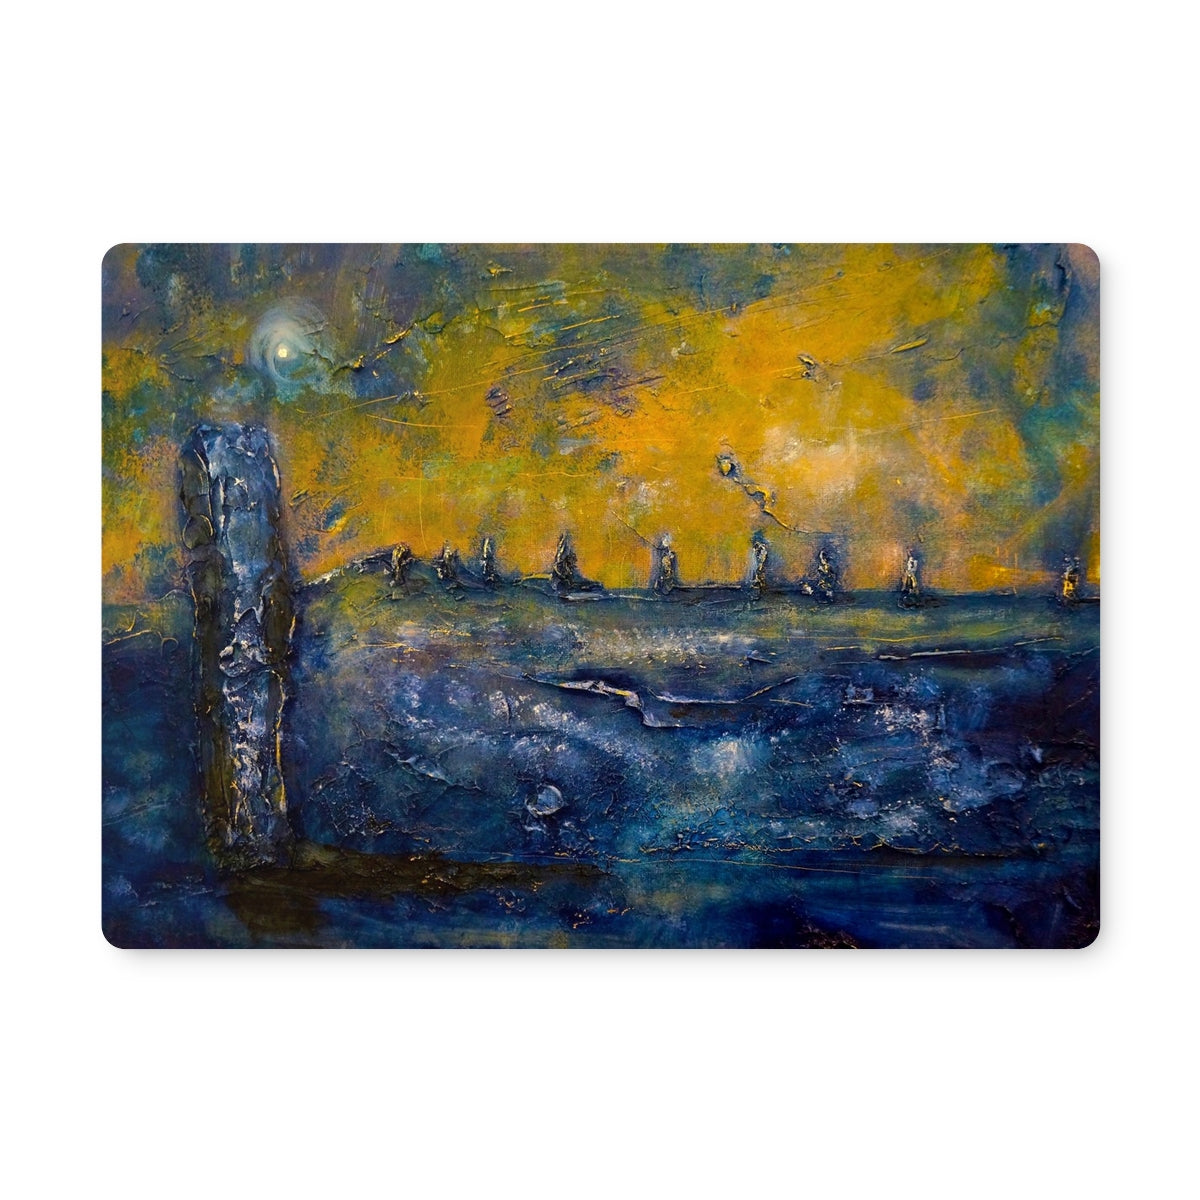 Brodgar Moonlight Orkney Art Gifts Placemat-Placemats-Orkney Art Gallery-Single Placemat-Paintings, Prints, Homeware, Art Gifts From Scotland By Scottish Artist Kevin Hunter